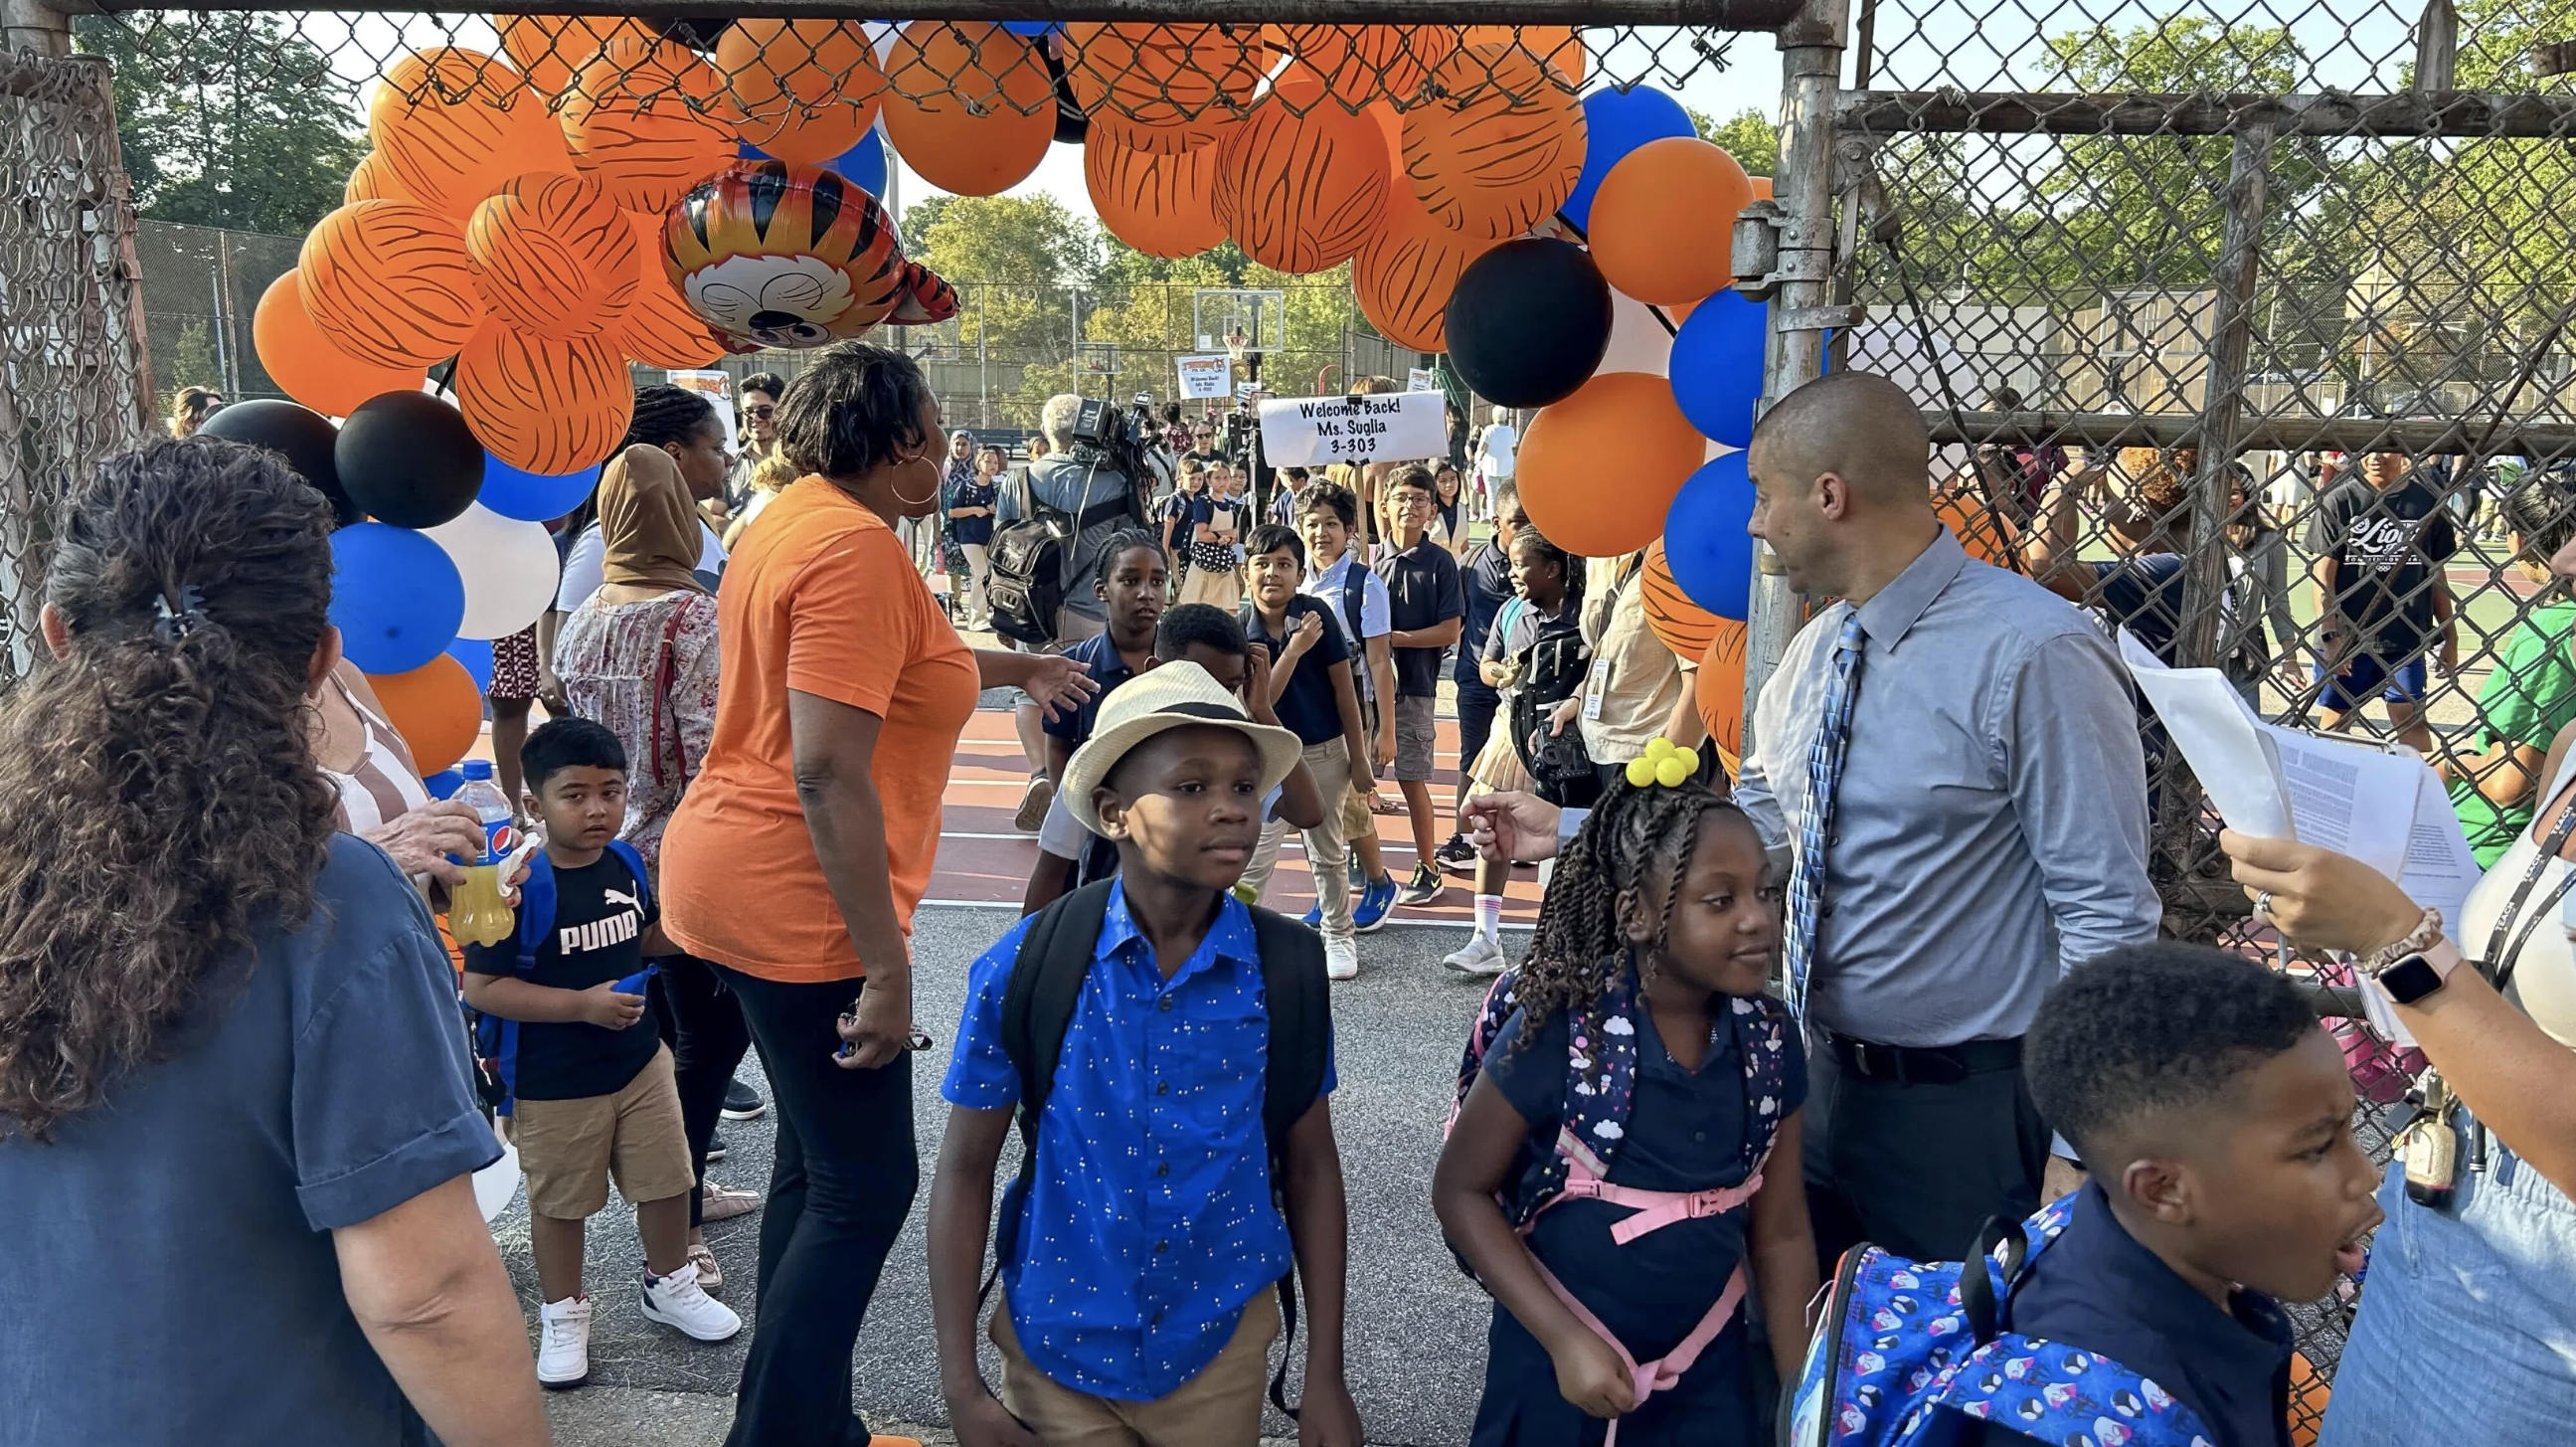 First day of school for NYC: Smiles, sweat, and fears of a possible bus strike